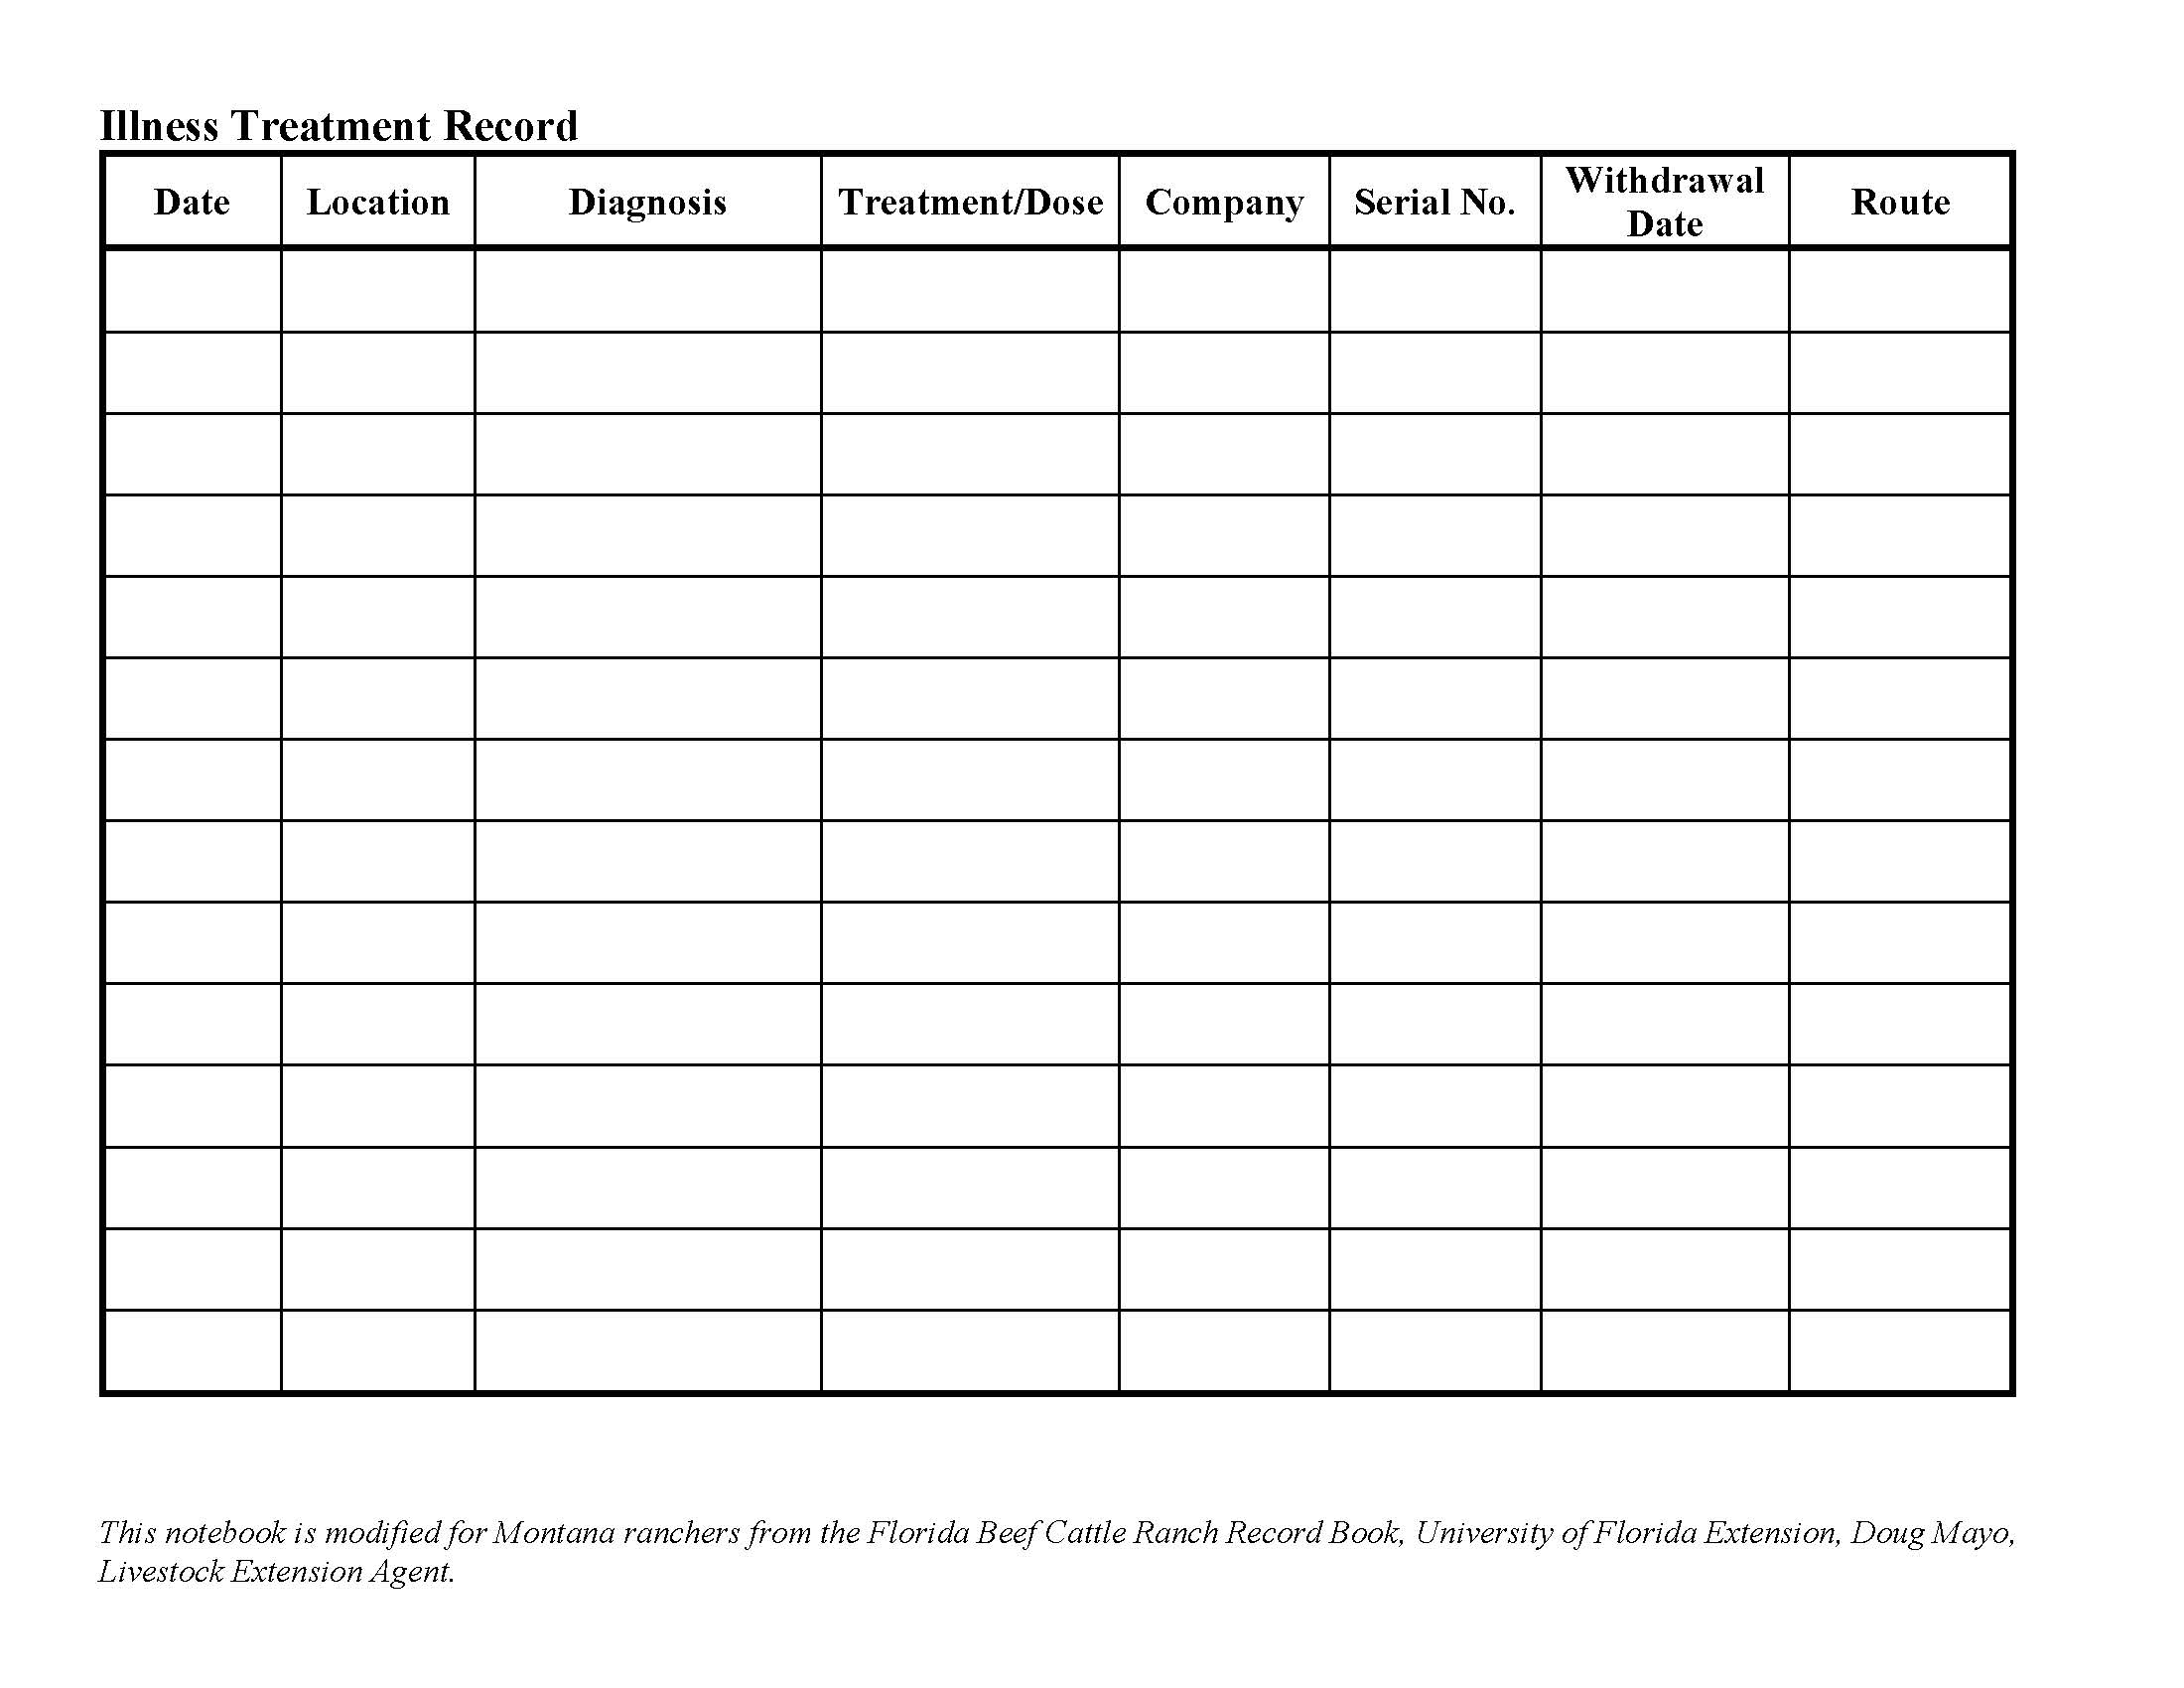 A sample table for keeping records on illness treatments. Used in the rancher notebook.